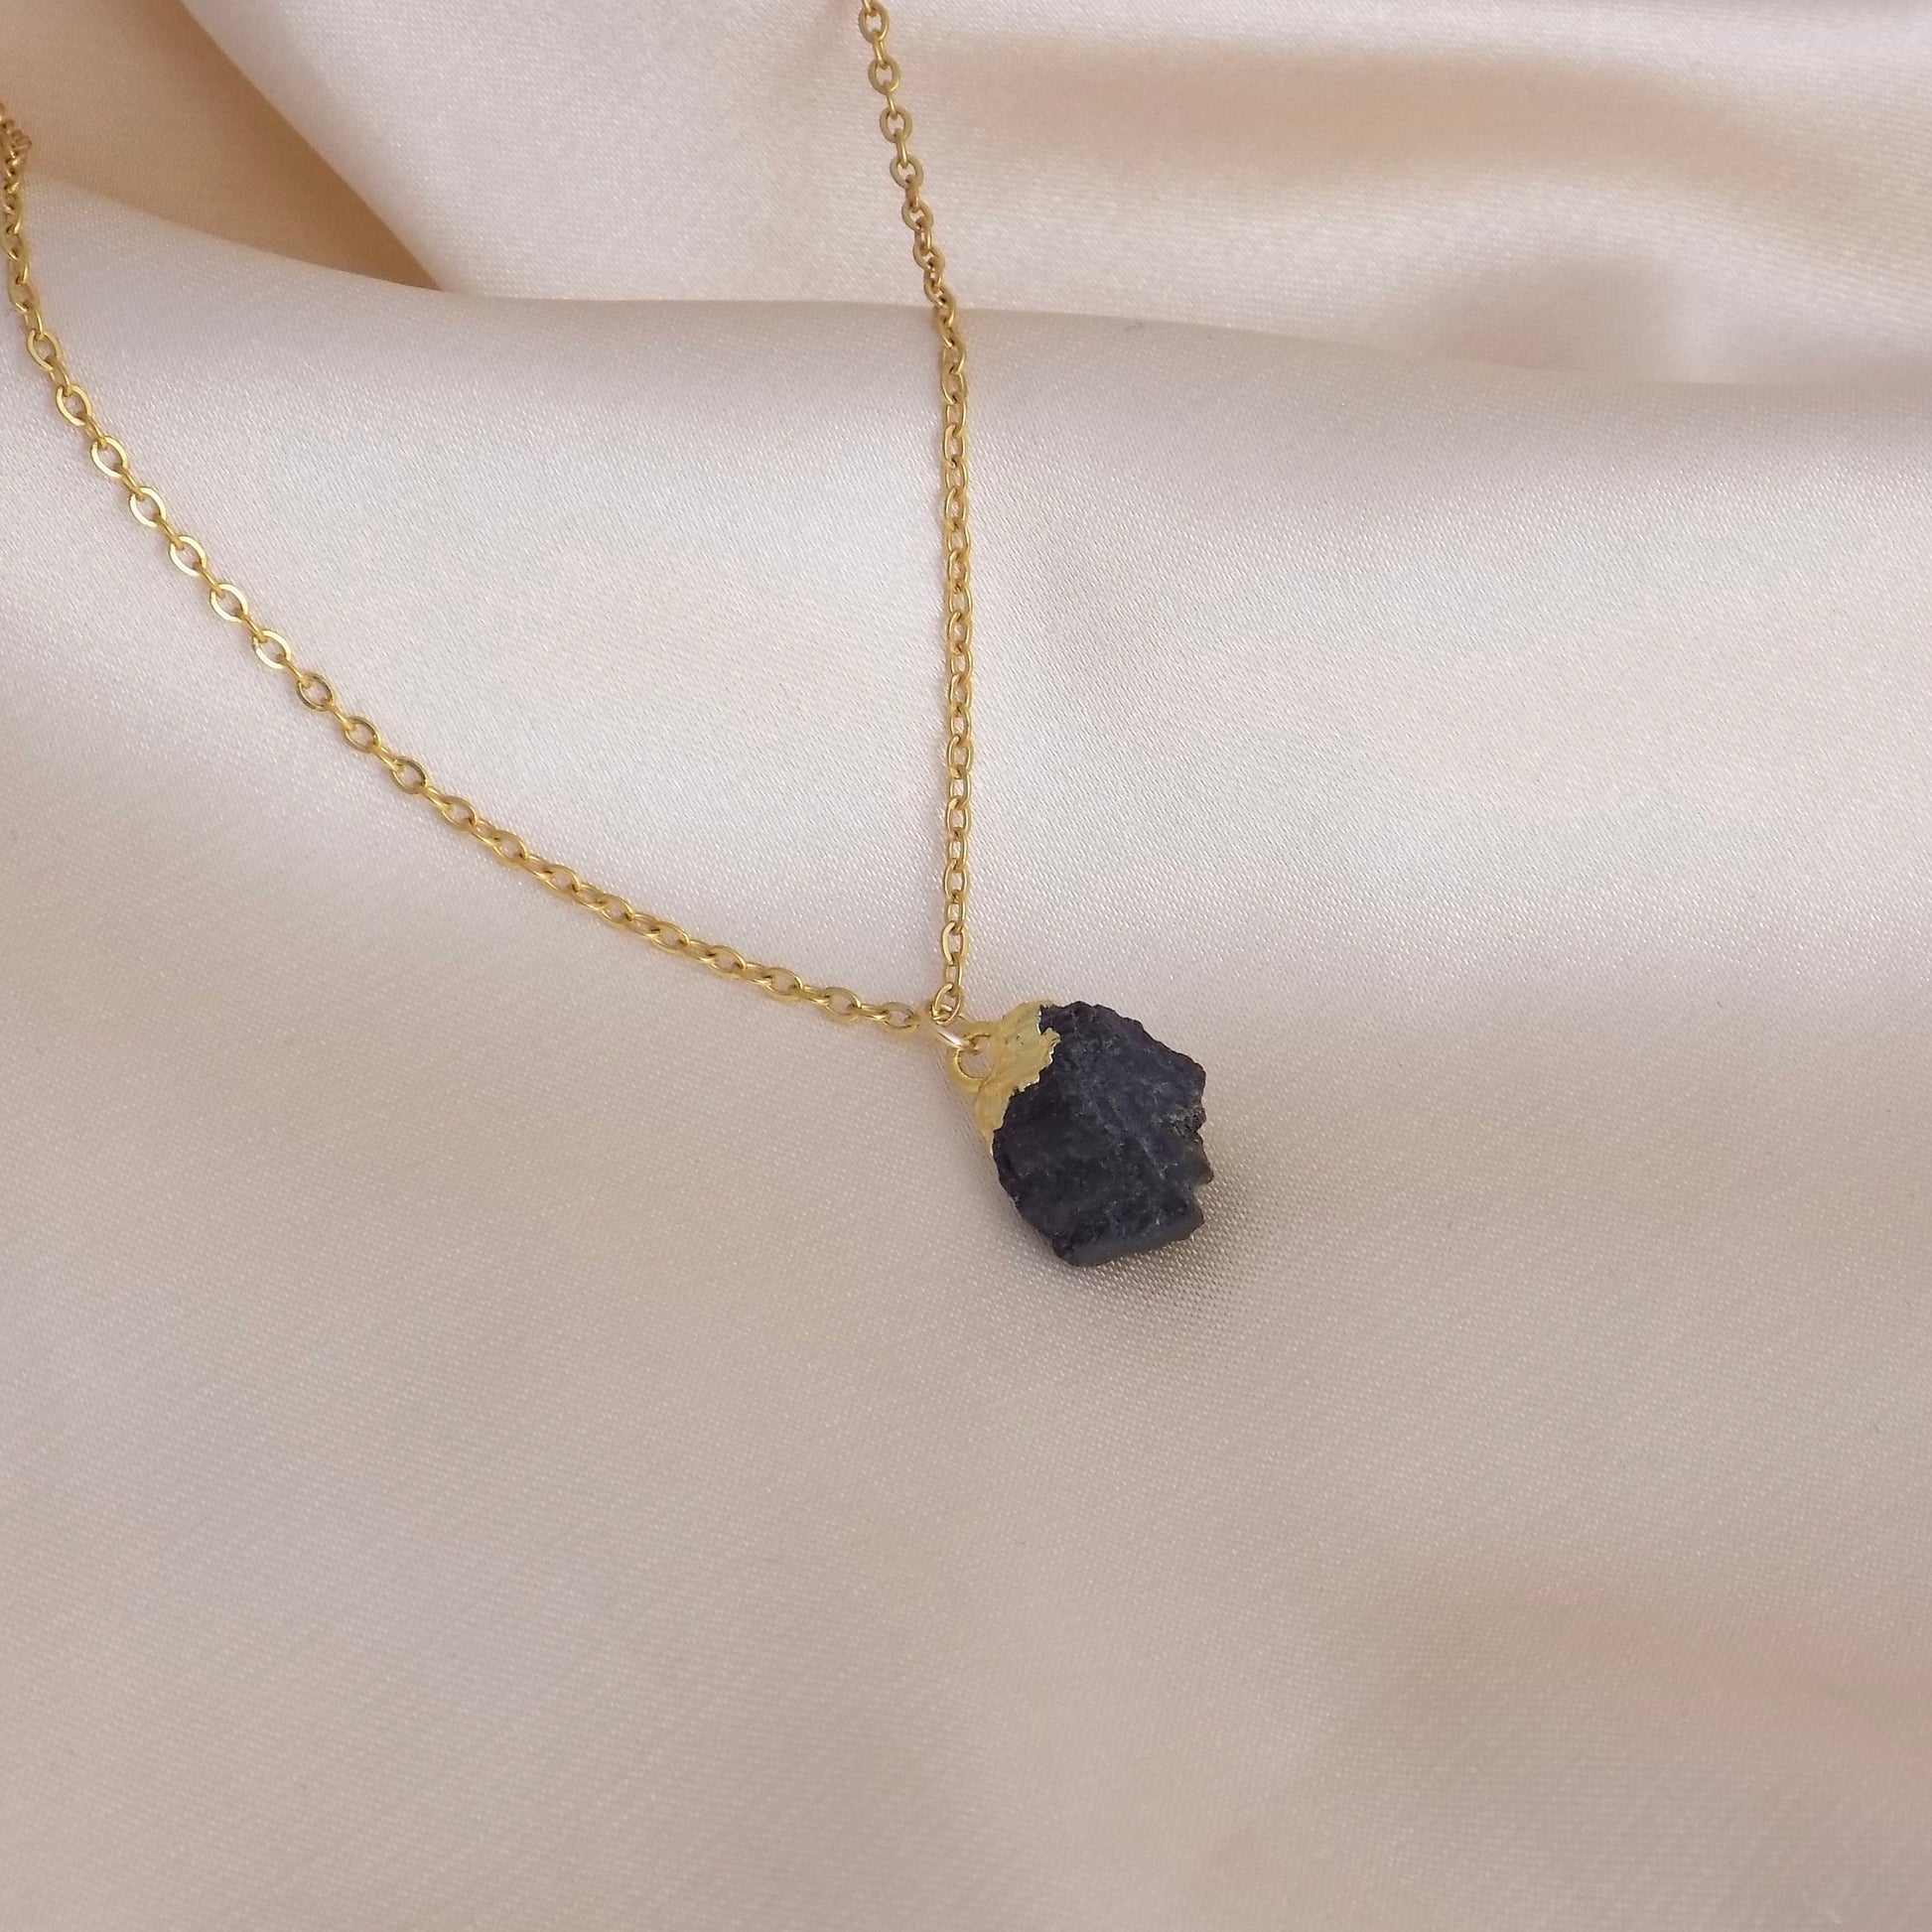 Small Raw Black Tourmaline Necklace on 18K Gold Stainless Steel Chain, M6-714